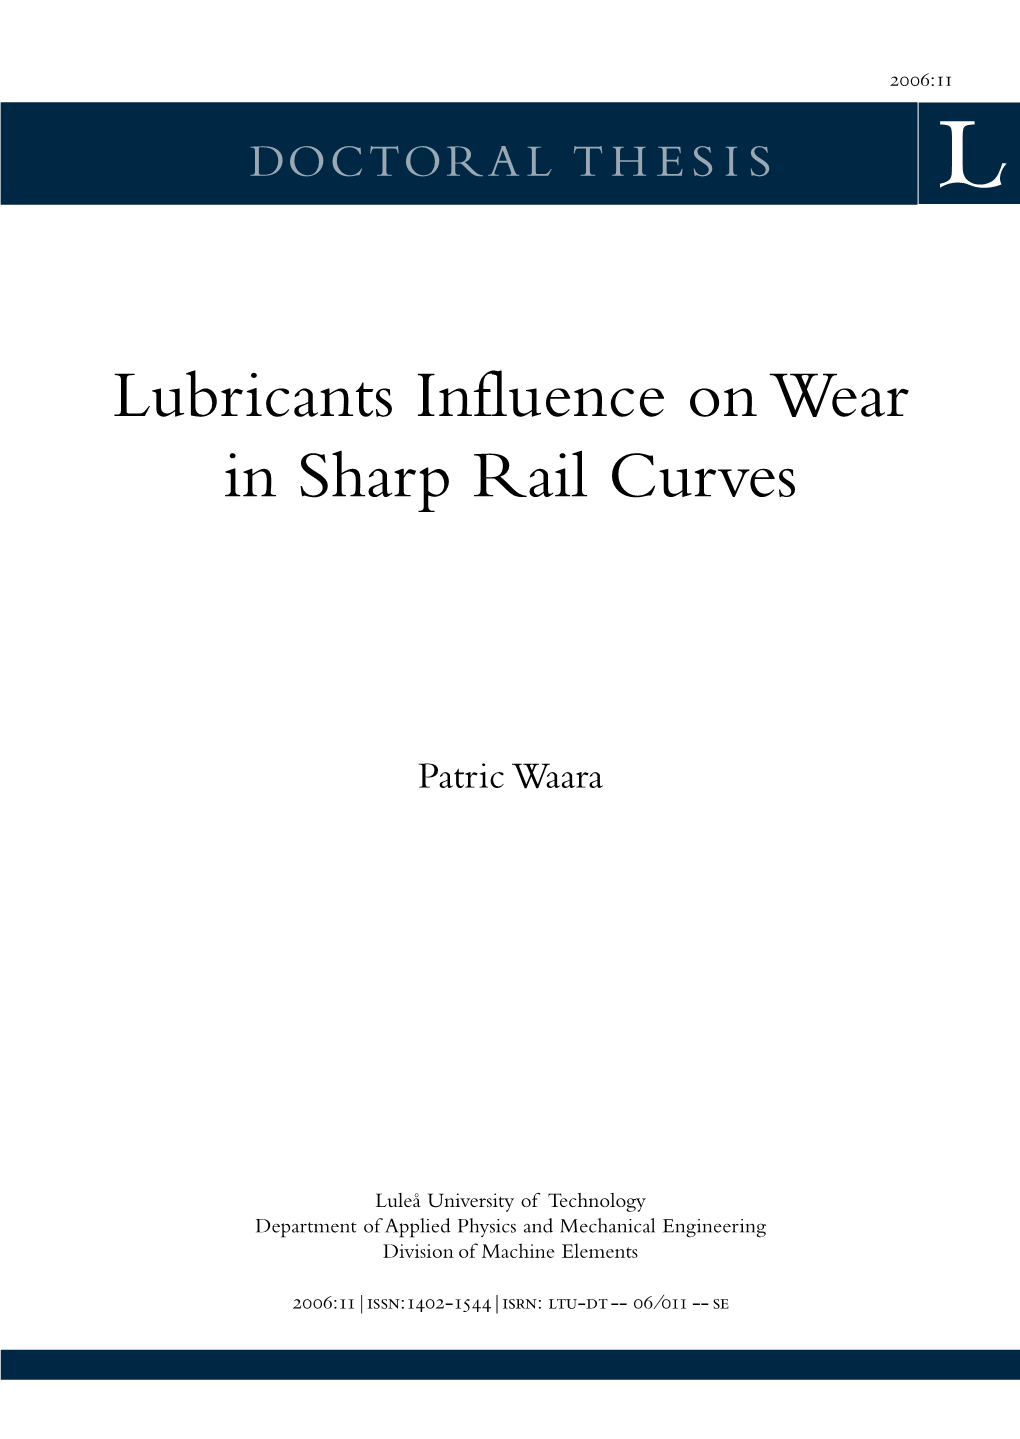 Lubricants Influence on Wear in Sharp Rail Curves